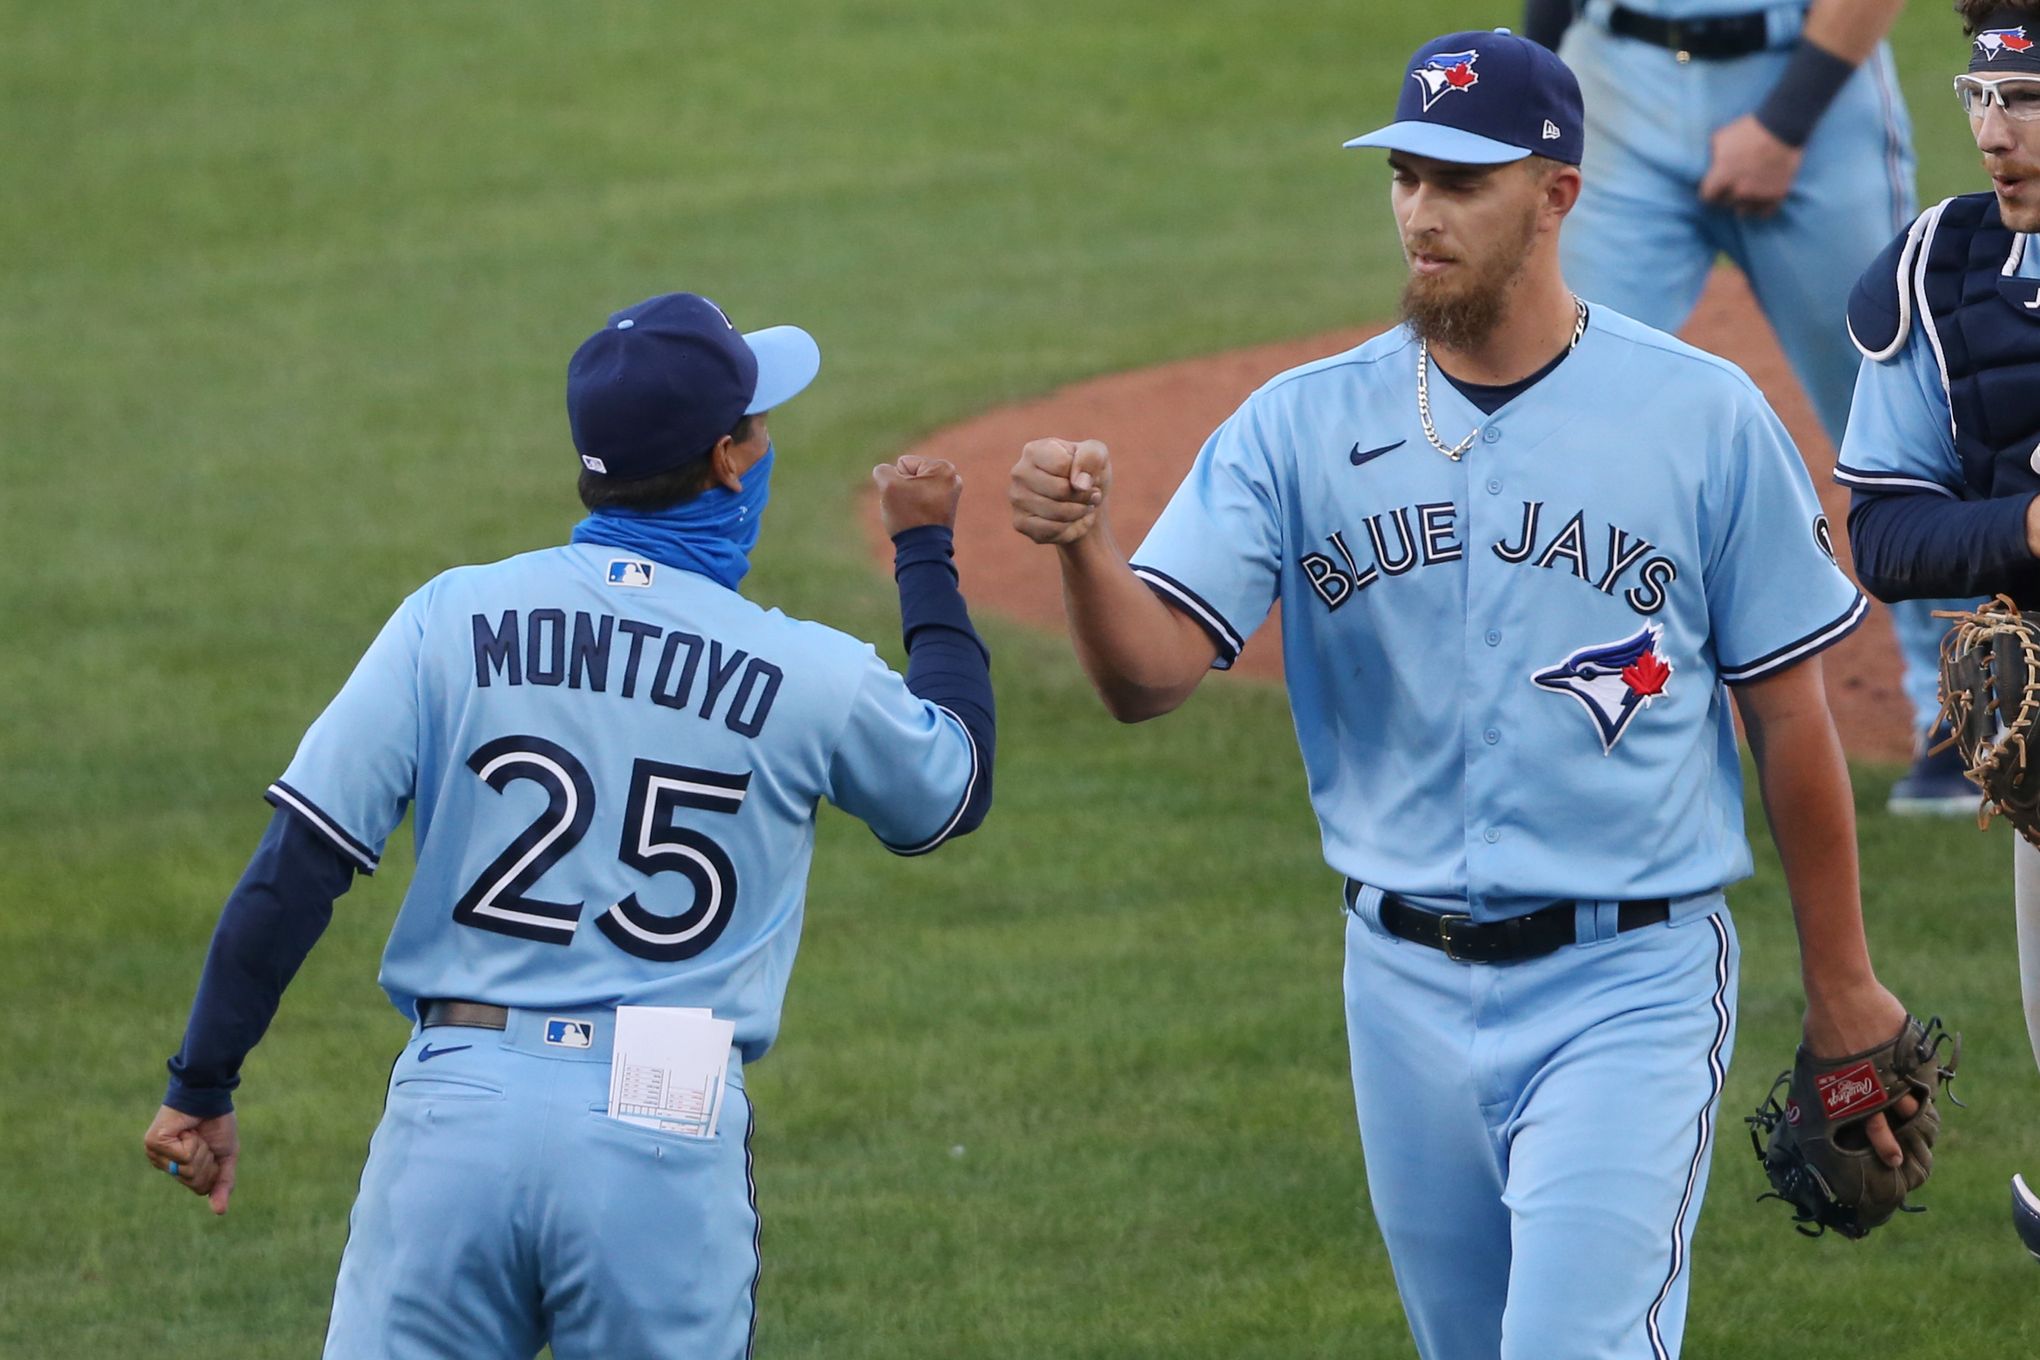 Why Charlie Montoyo is out in Toronto, even though the Blue Jays